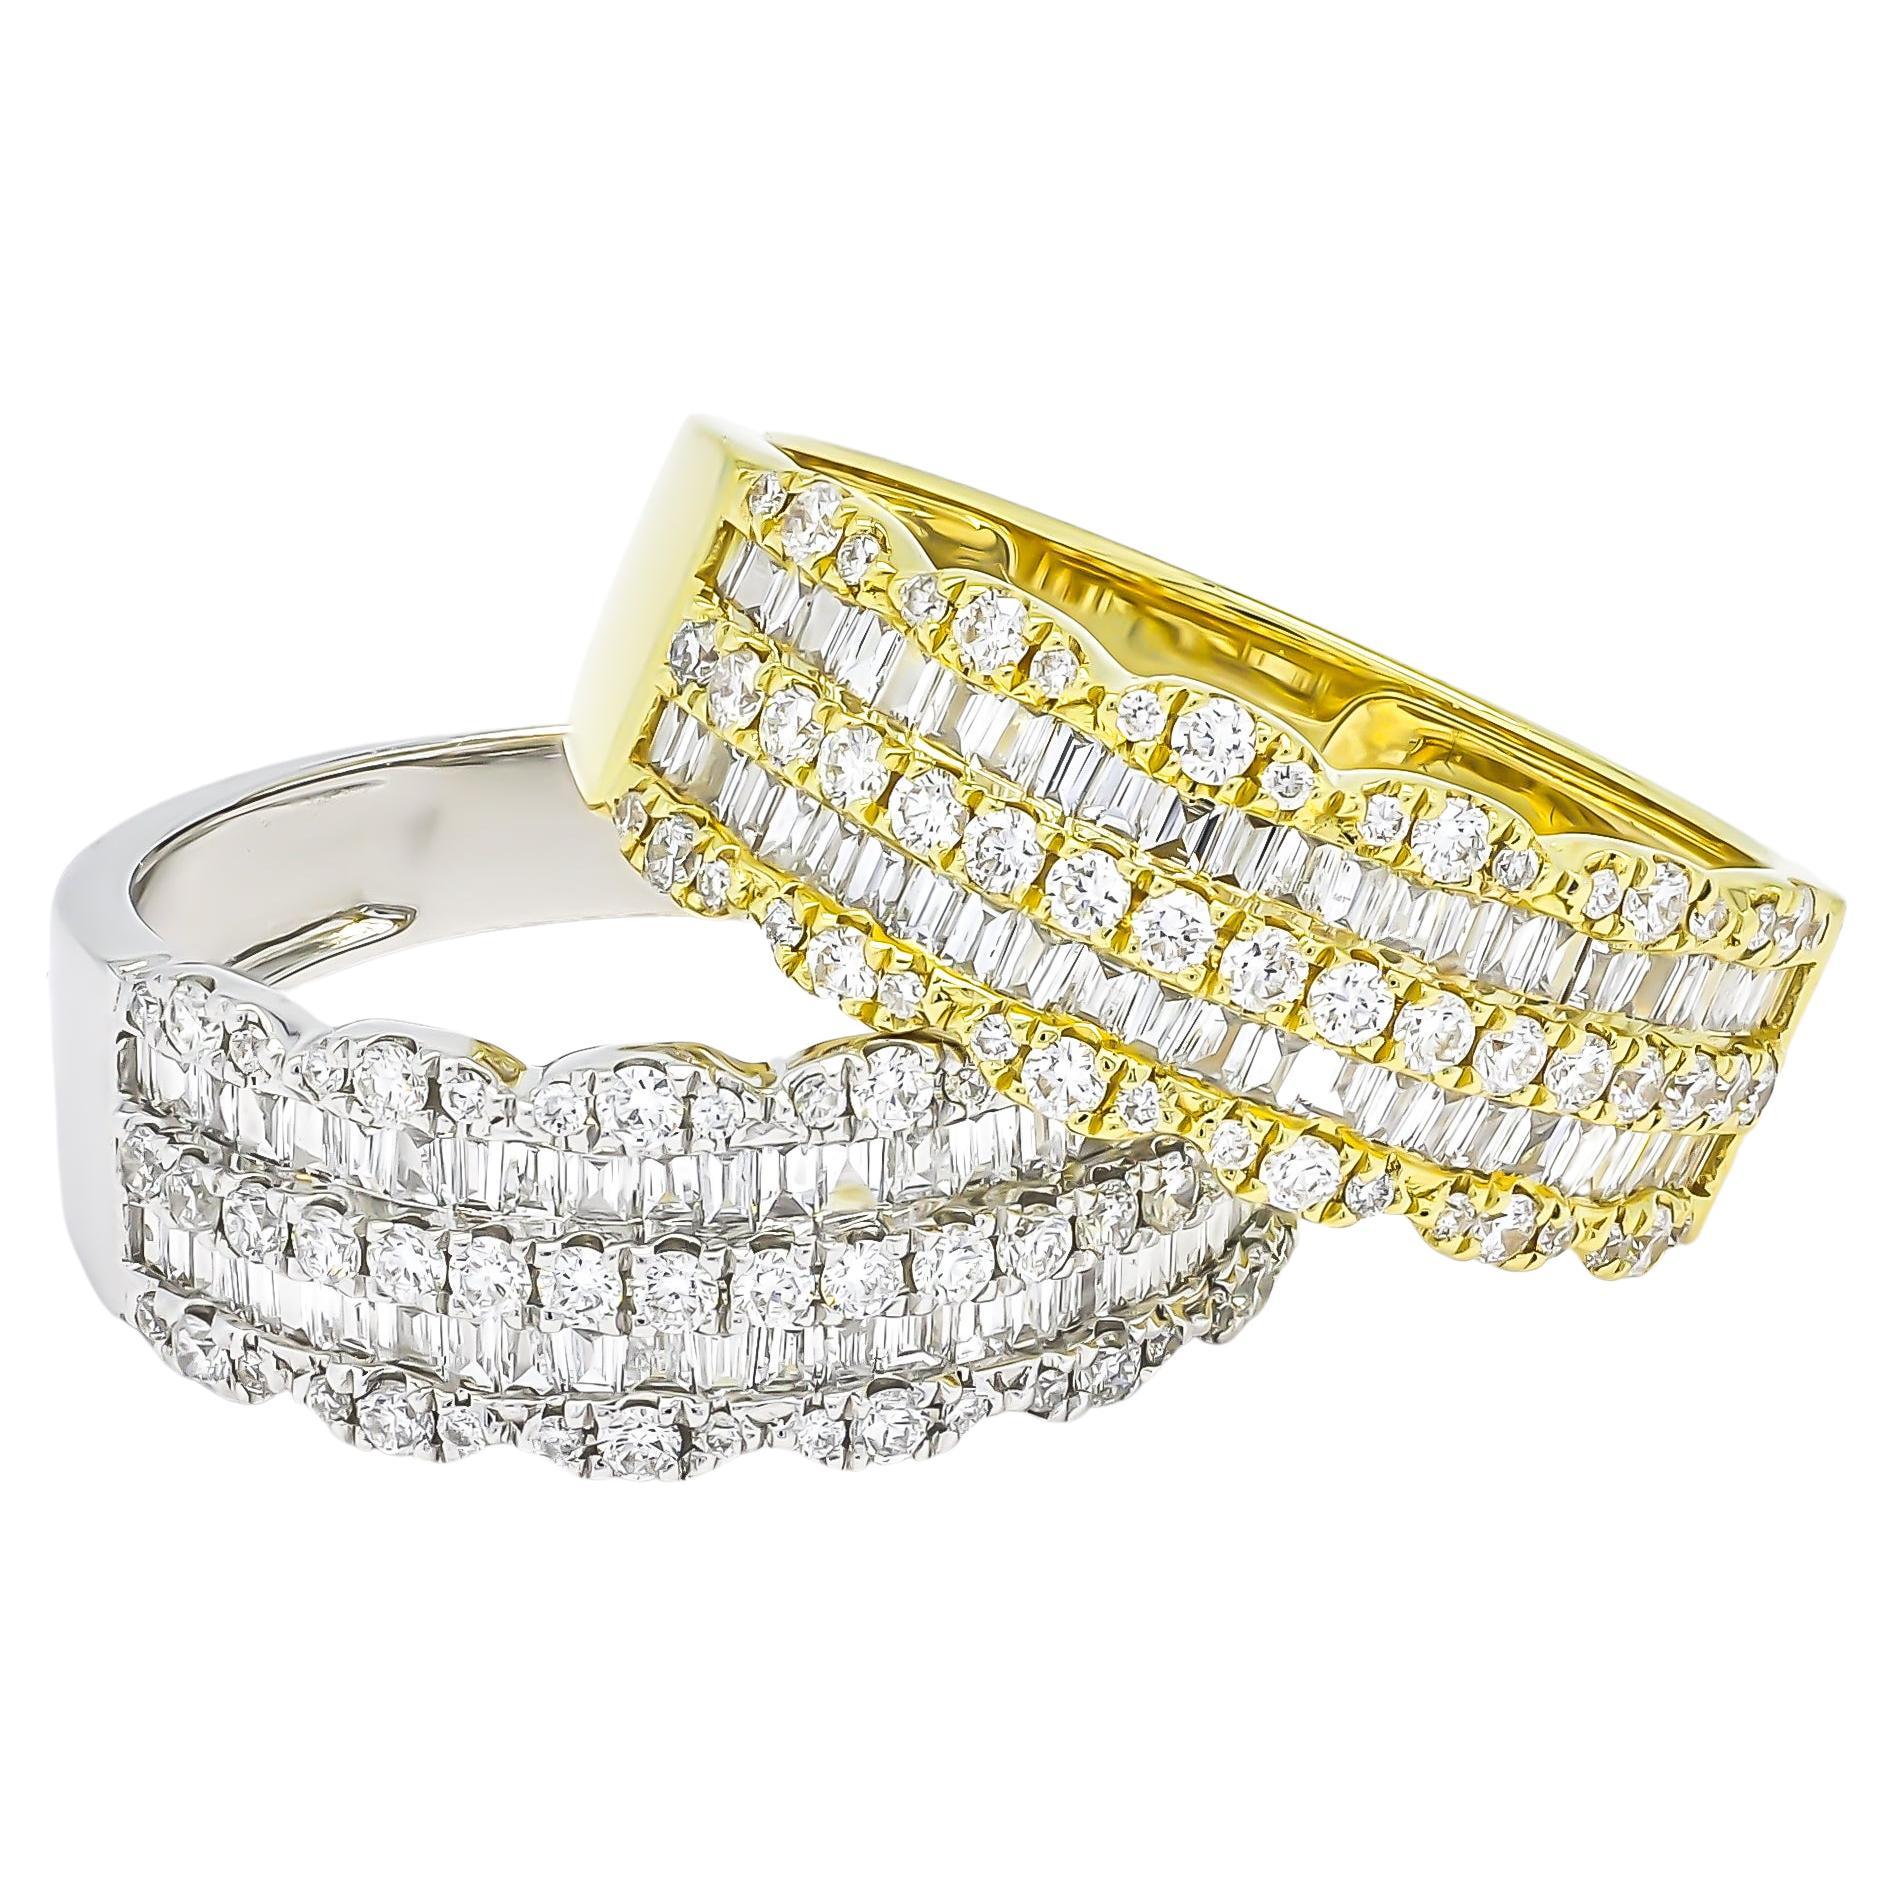 If you're looking for a beautiful and versatile diamond band that can be worn alone or stacked with other rings, consider a baguette and round diamond channel set 18 kt Yellow gold band. This exquisite piece features a row of alternating baguette